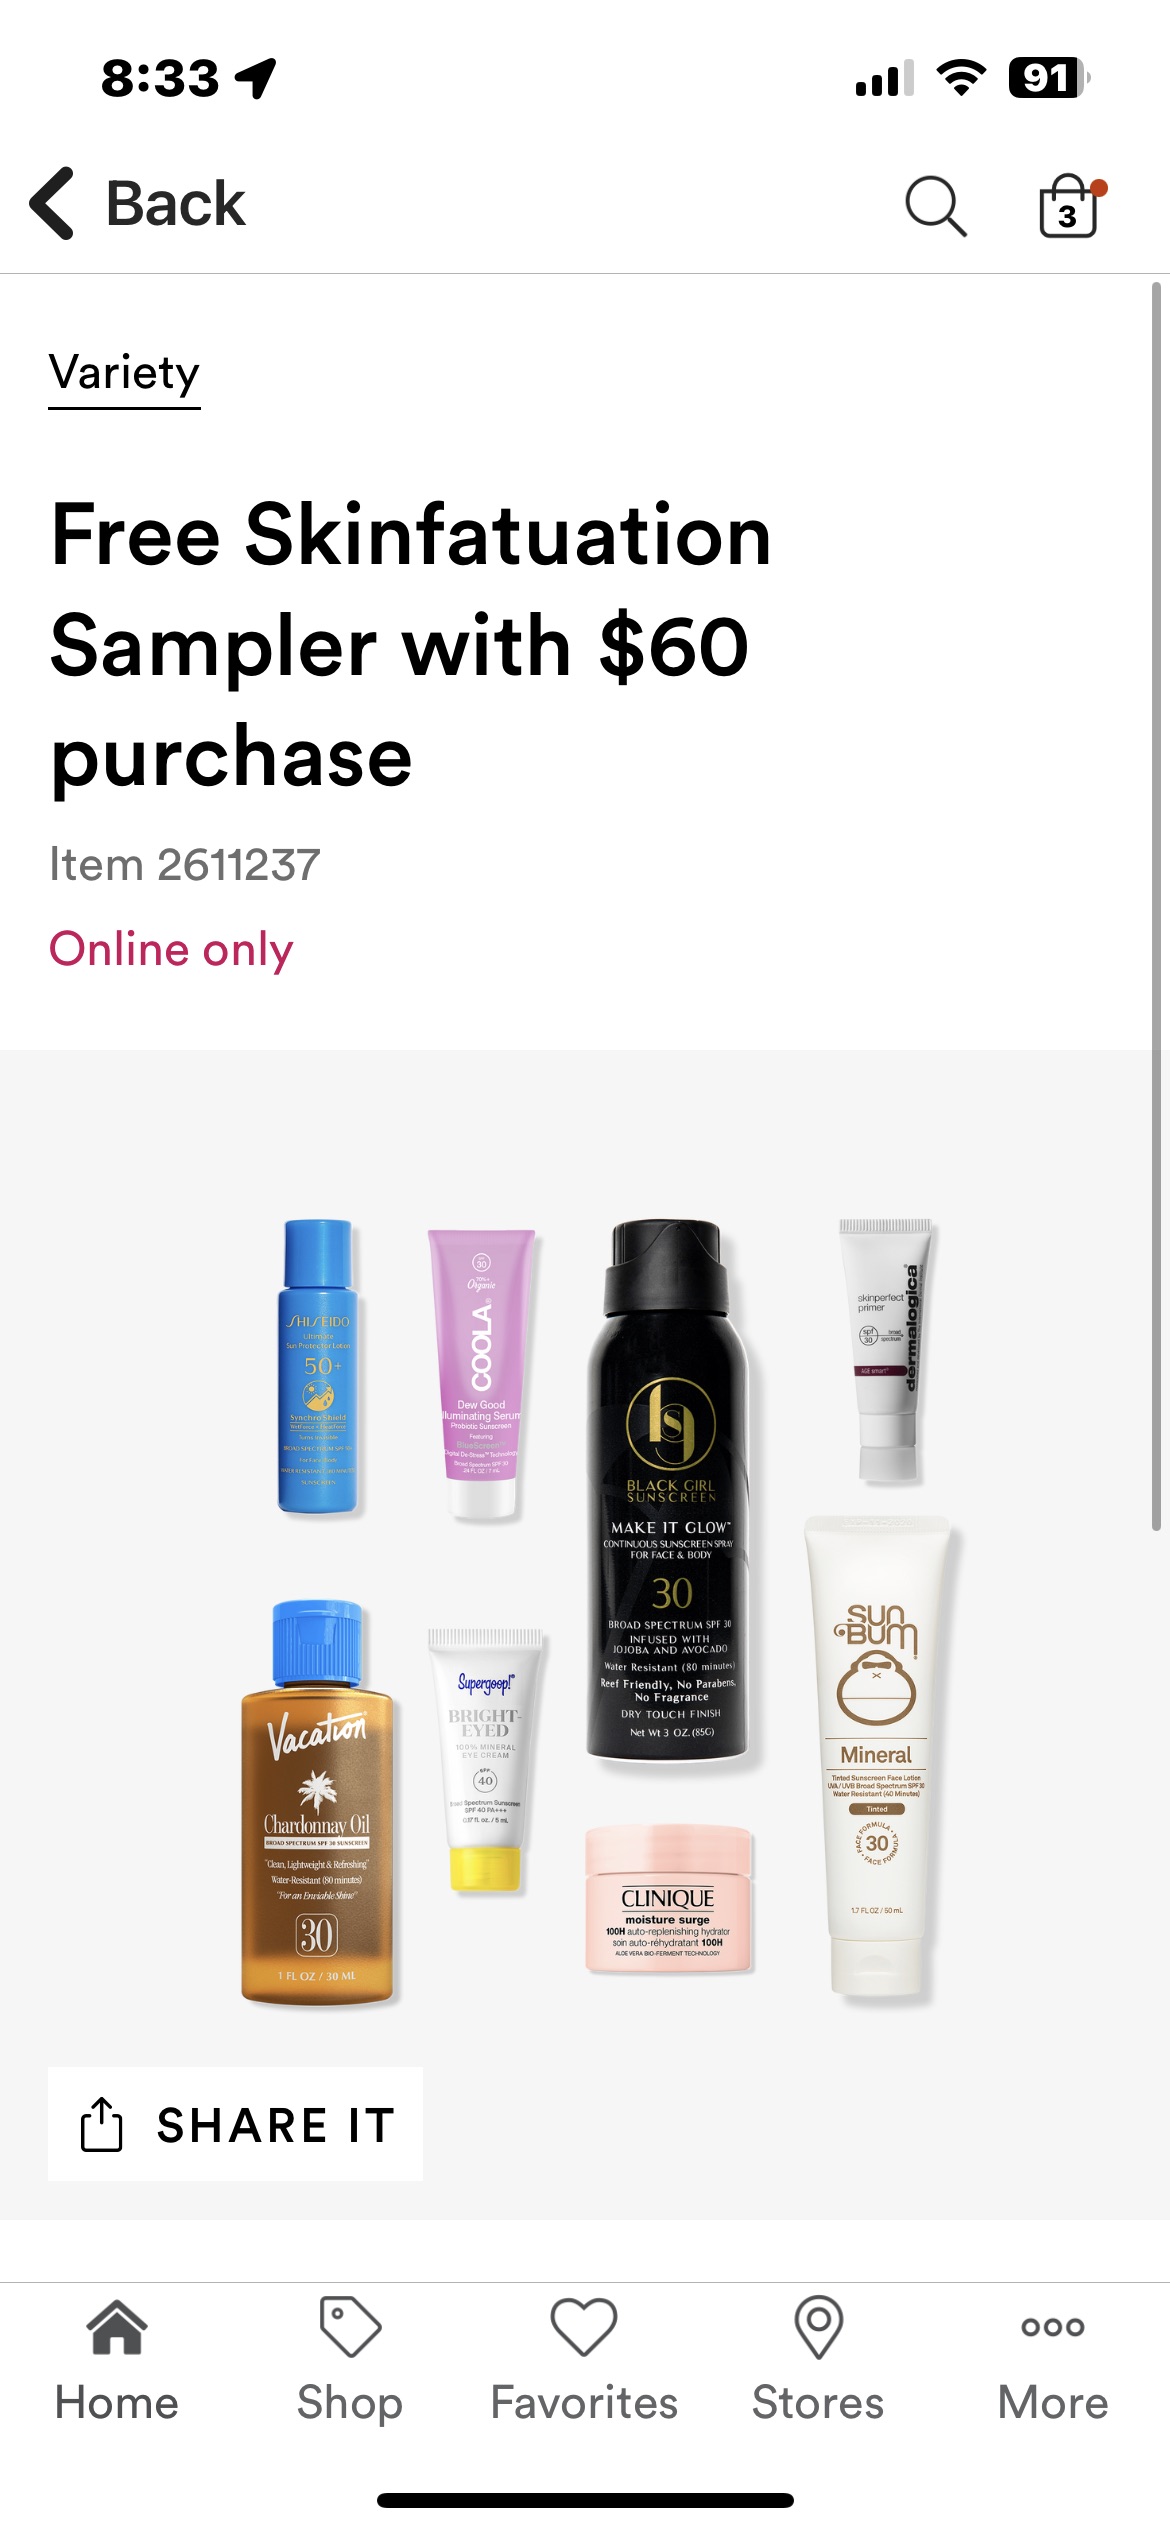 Ulta Beauty | Official Site - Makeup, Hair Care, Skin Care, Fragrance, Bath & Gifts